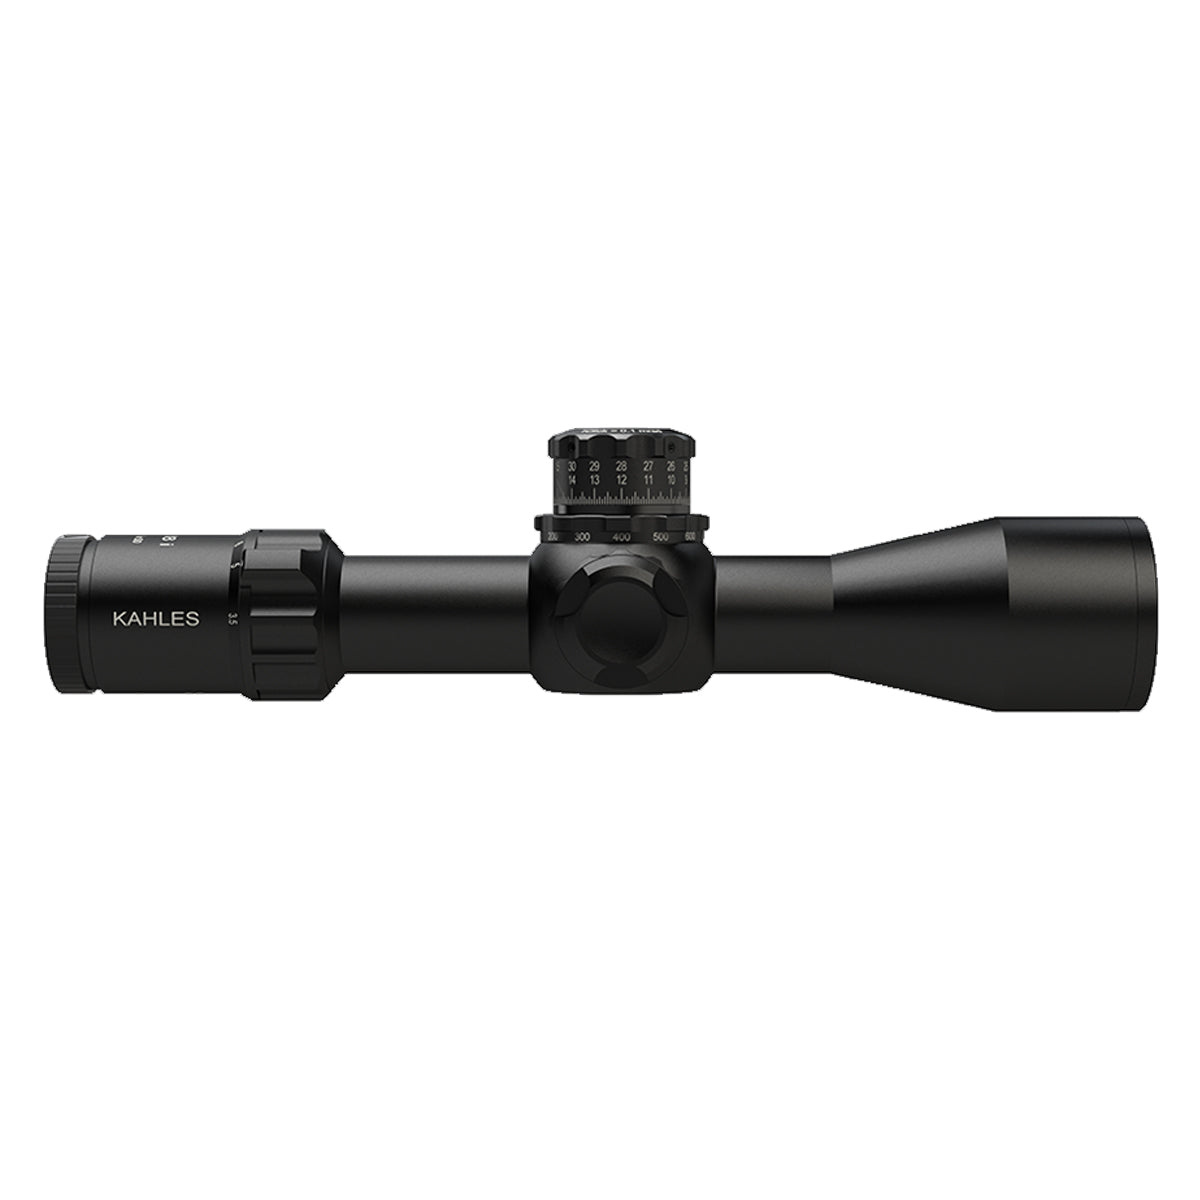 Kahles K318i 3.5-18x50 CCW SKMR3 w-left in  by GOHUNT | Kahles - GOHUNT Shop